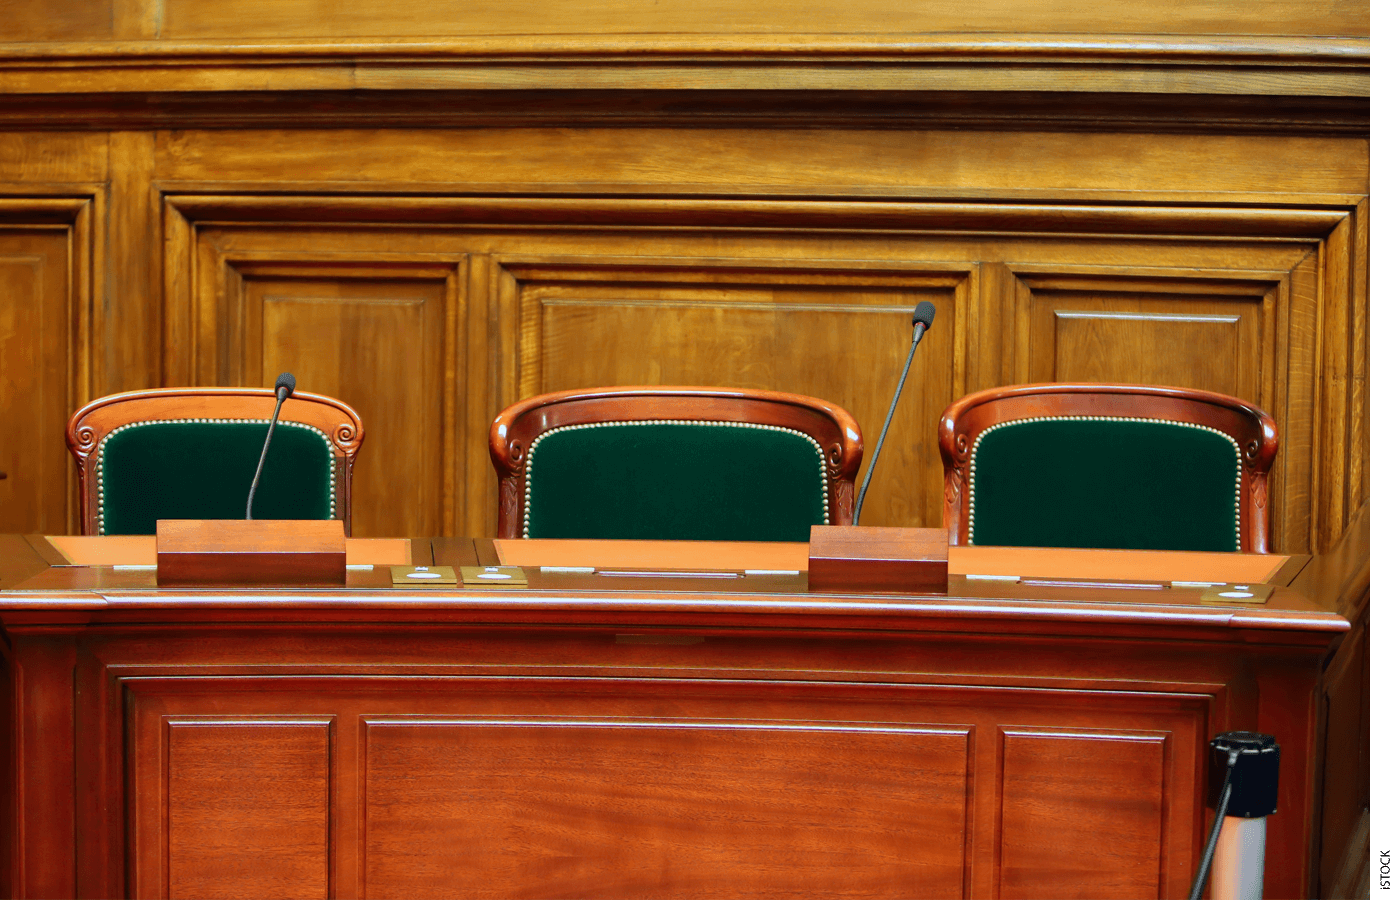 Photo illustrating empty seats in a government building